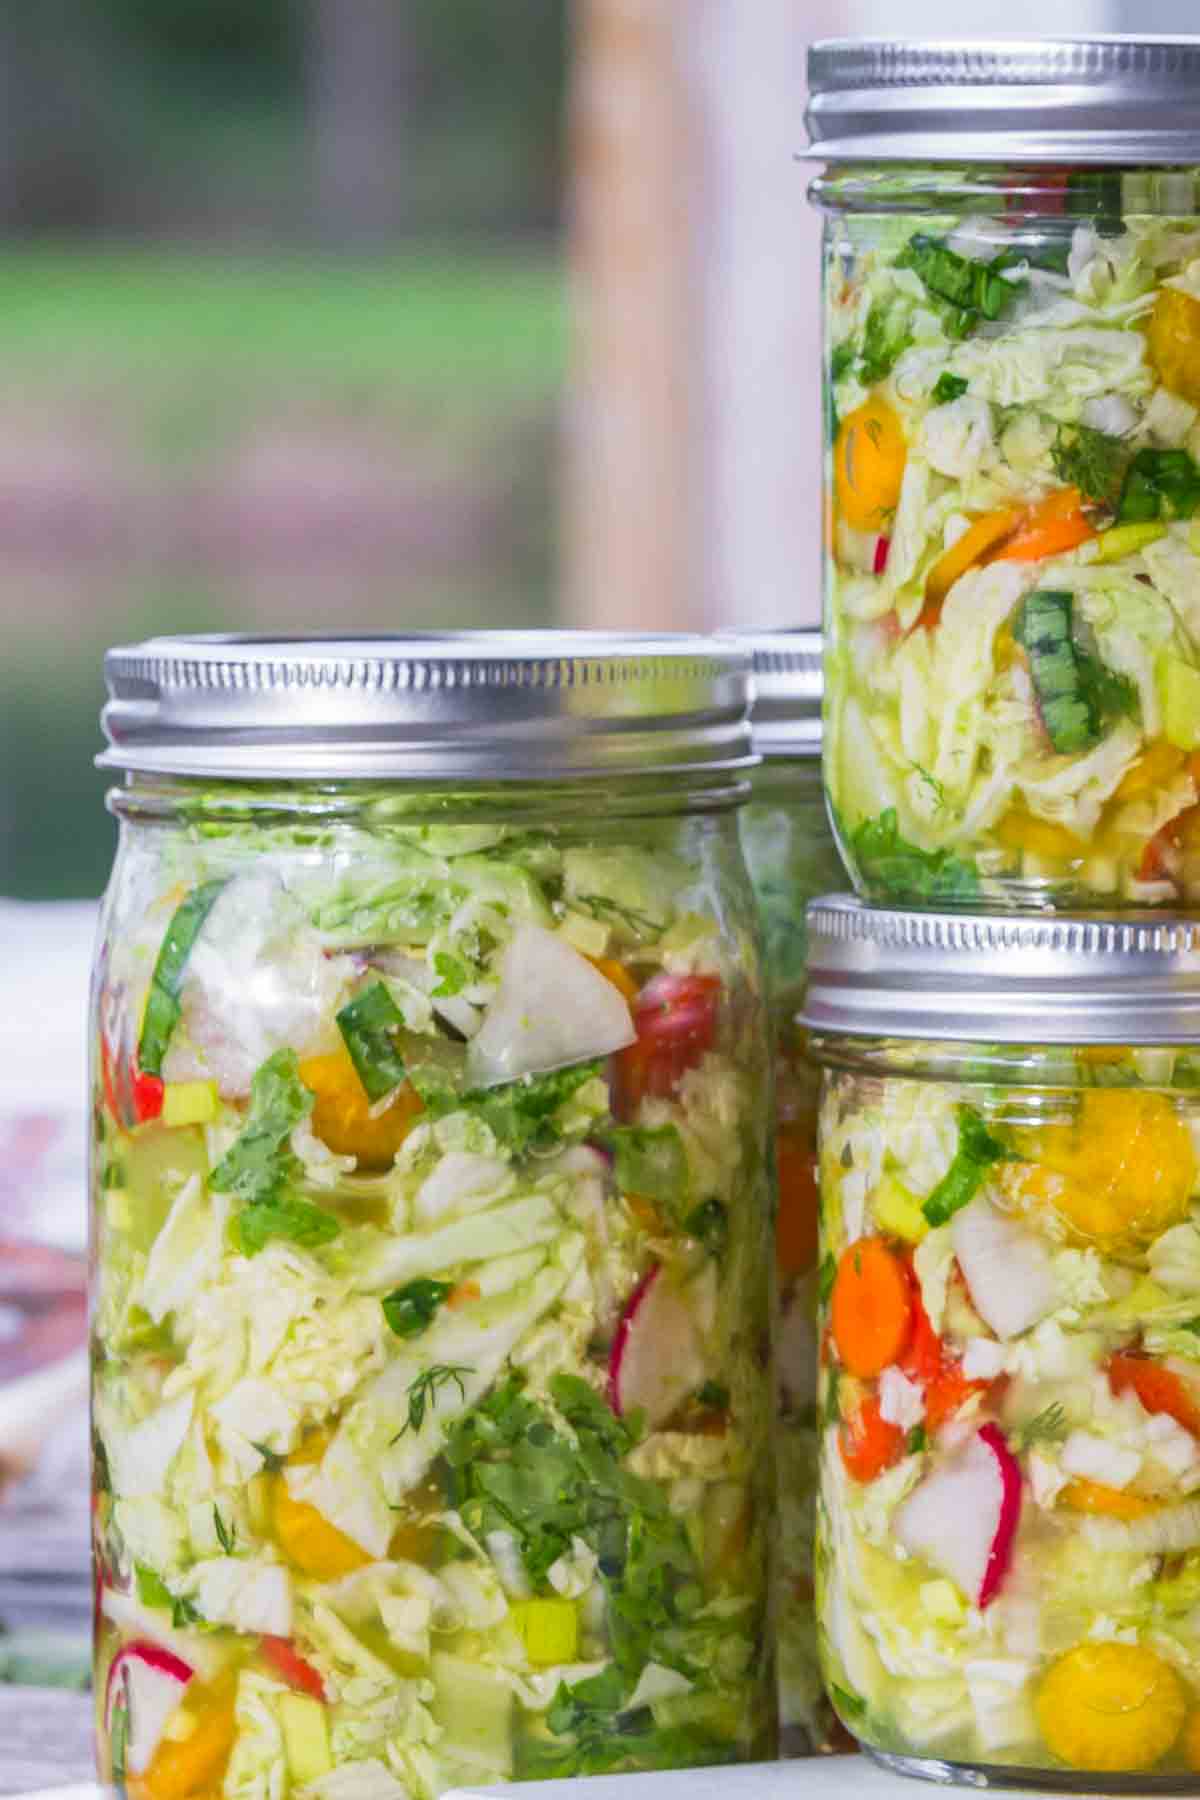 Home made cultured or fermented vegetables.